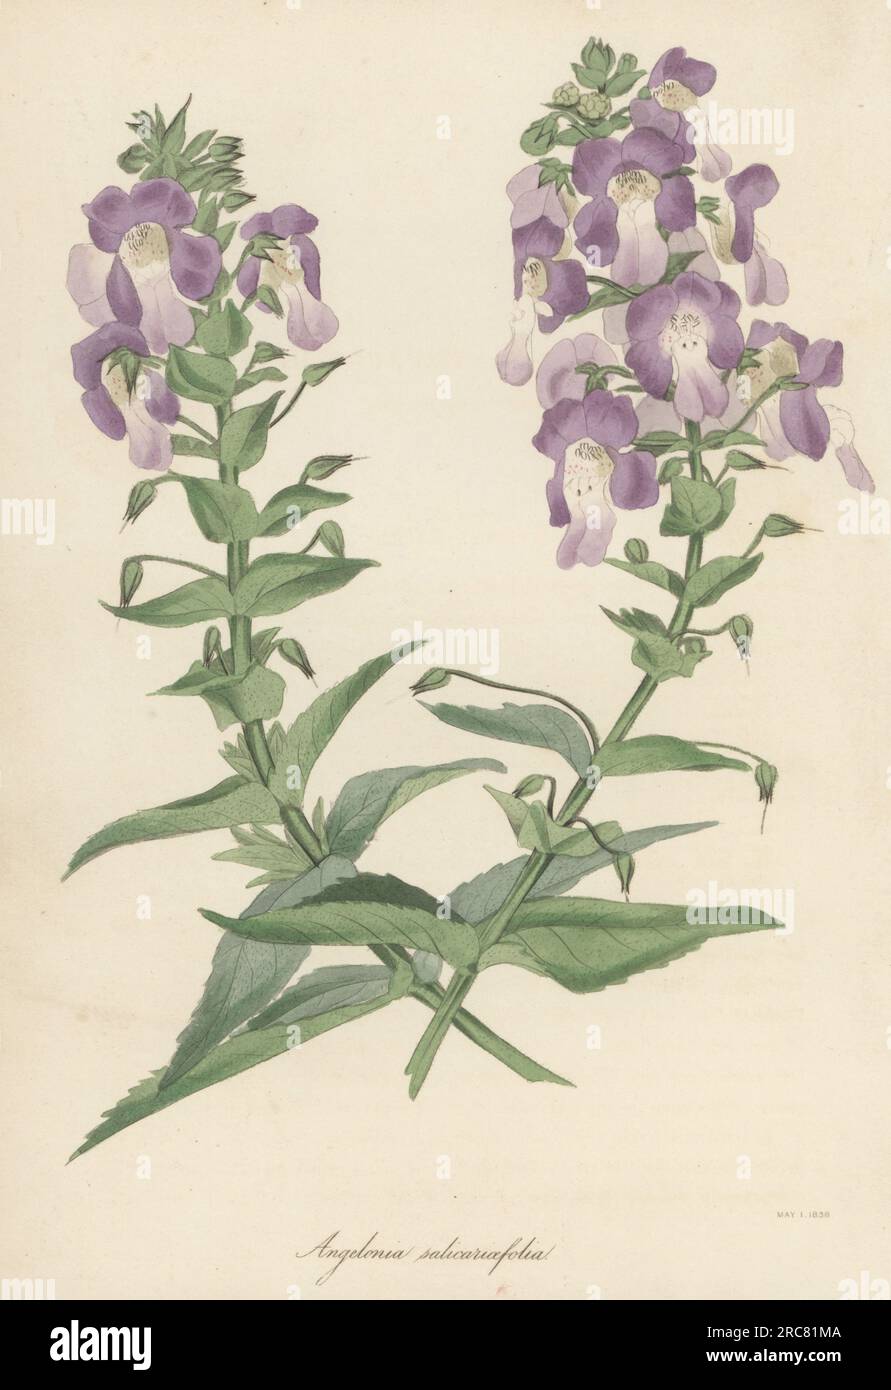 Willowleaf angelonia, Angelonia salicariifolia. Native to South America, introduced from Caracas, flowered at Spofforth, the garden of botanist William Herbert, Dean of Manchester, in 1819. Willow-leaved angelonia, Angelonia salicariaefolia. Handcoloured lithograph from Joseph Paxton’s Magazine of Botany, and Register of Flowering Plants, Volume 5, Orr and Smith, London, 1838. Stock Photo